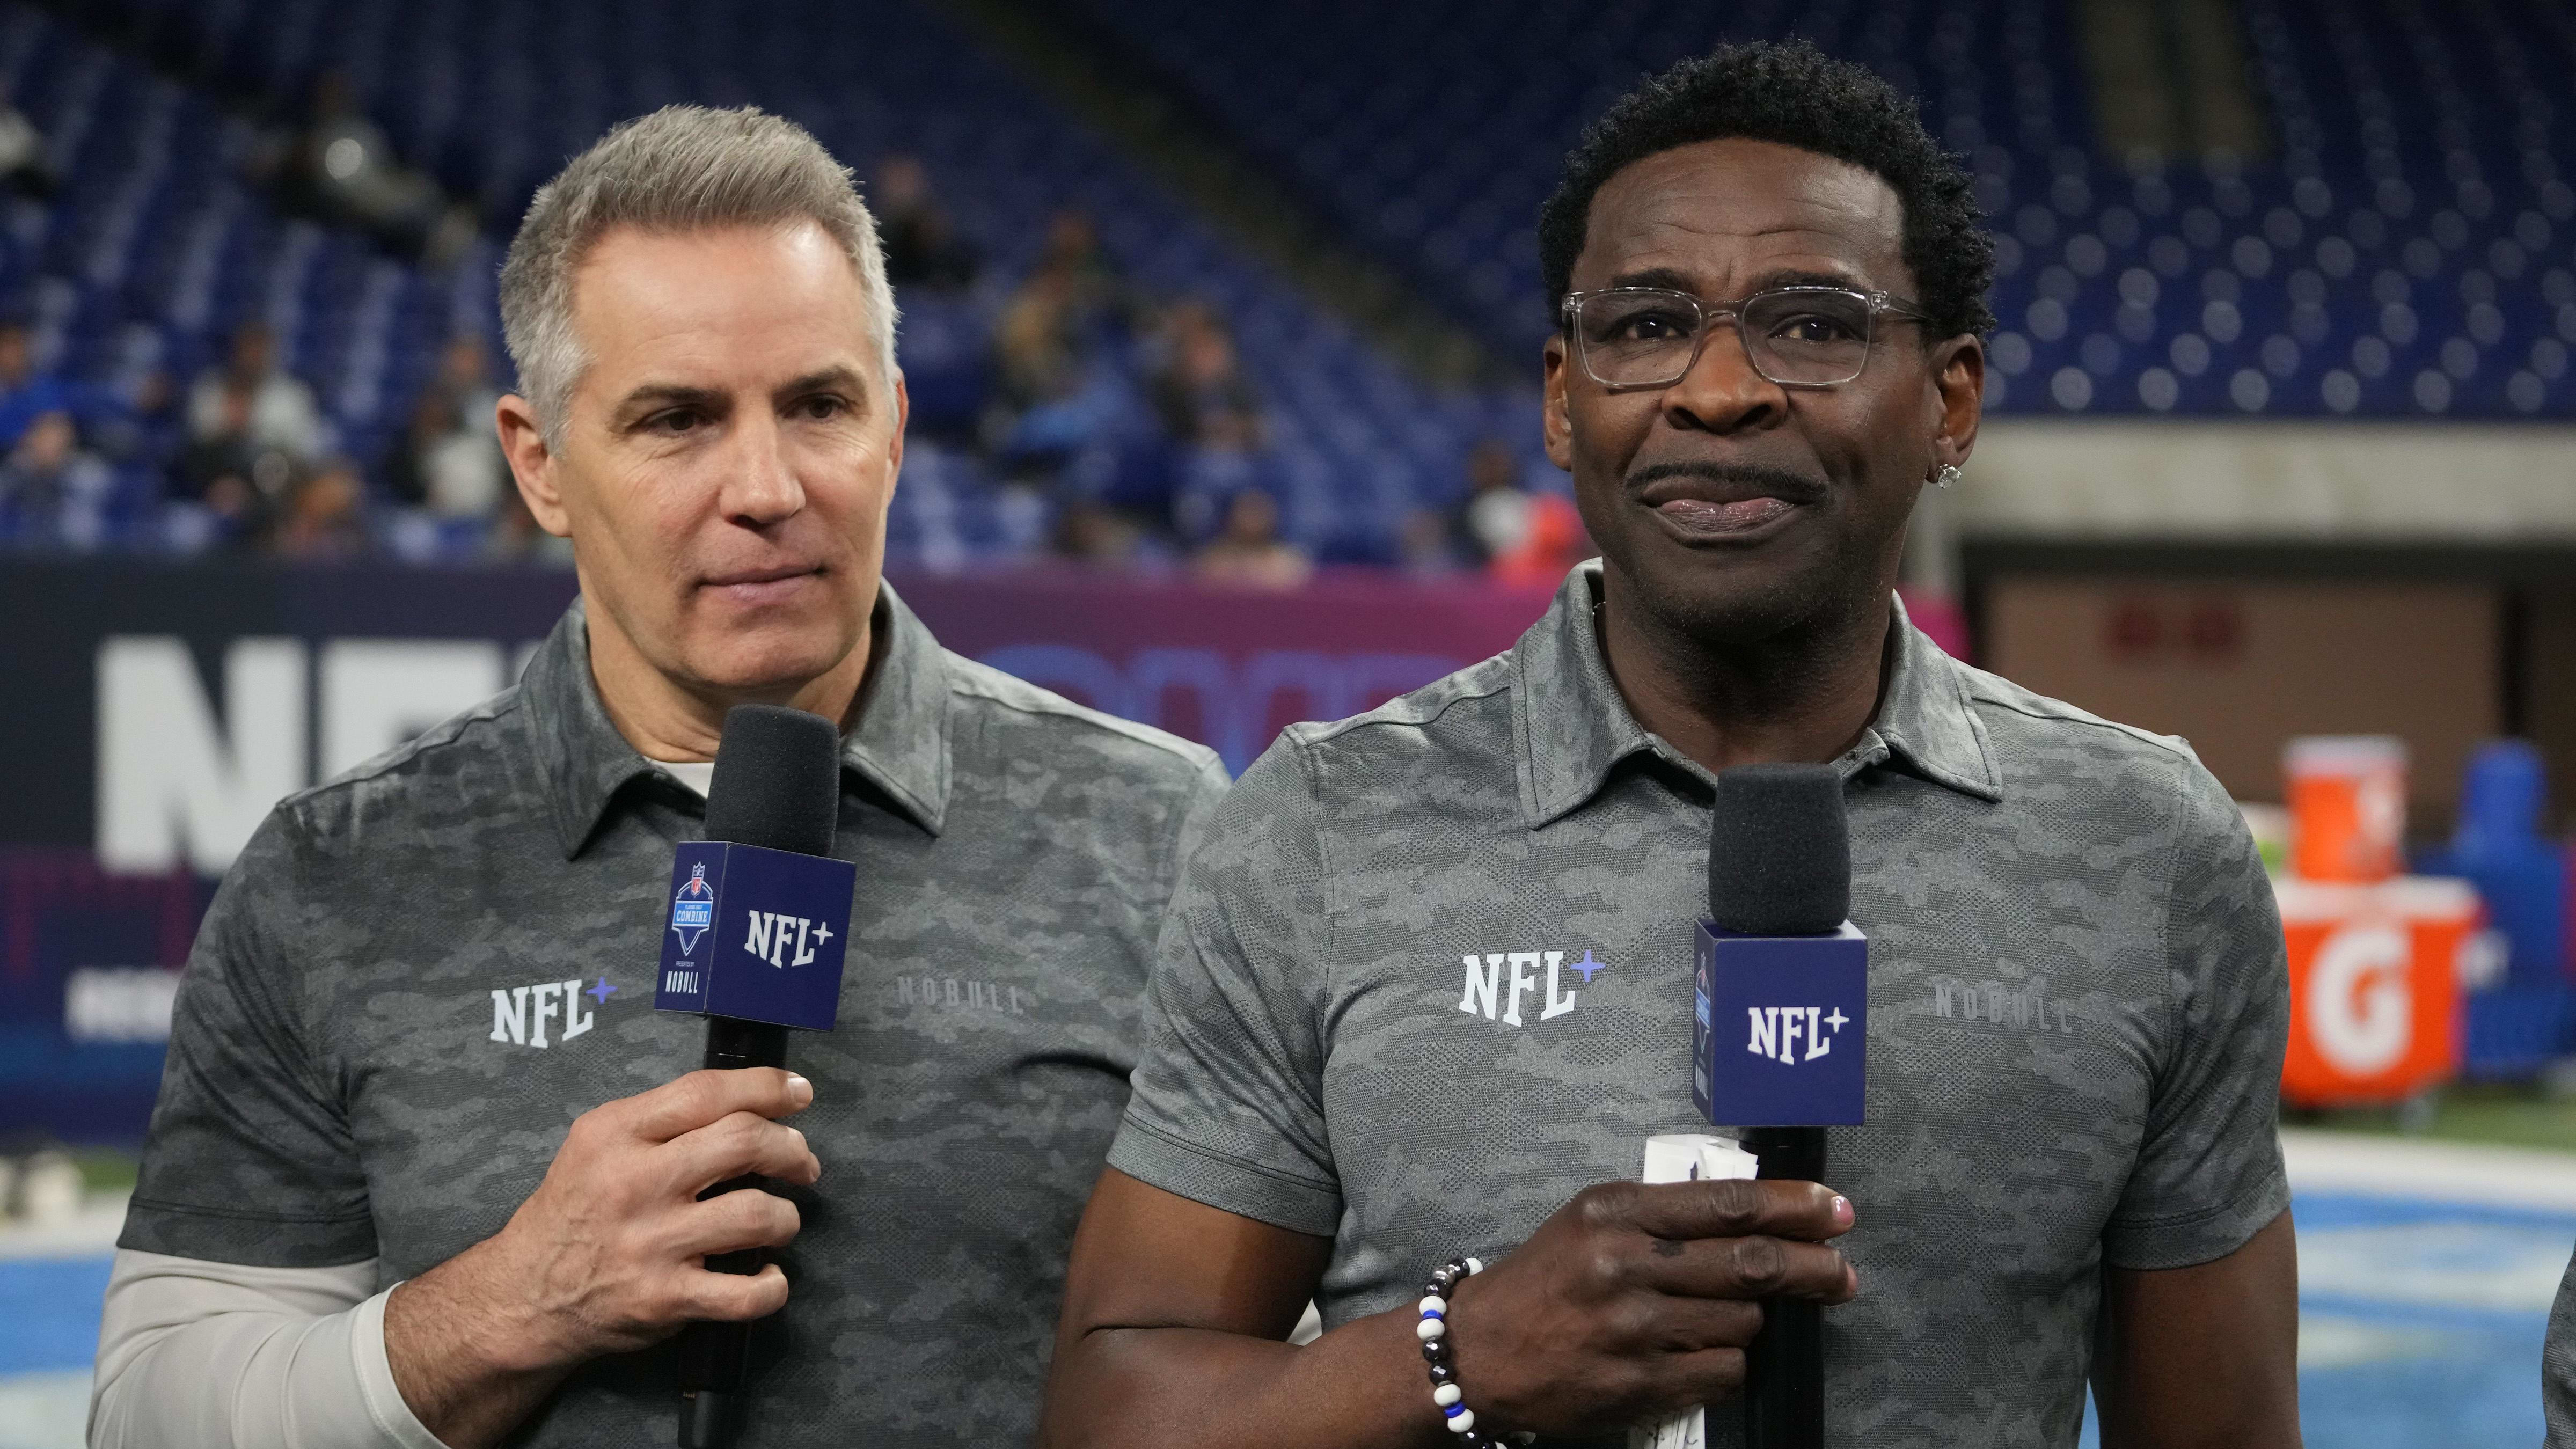 Michael Irvin Let Go by NFL Network After 15 Years as Analyst